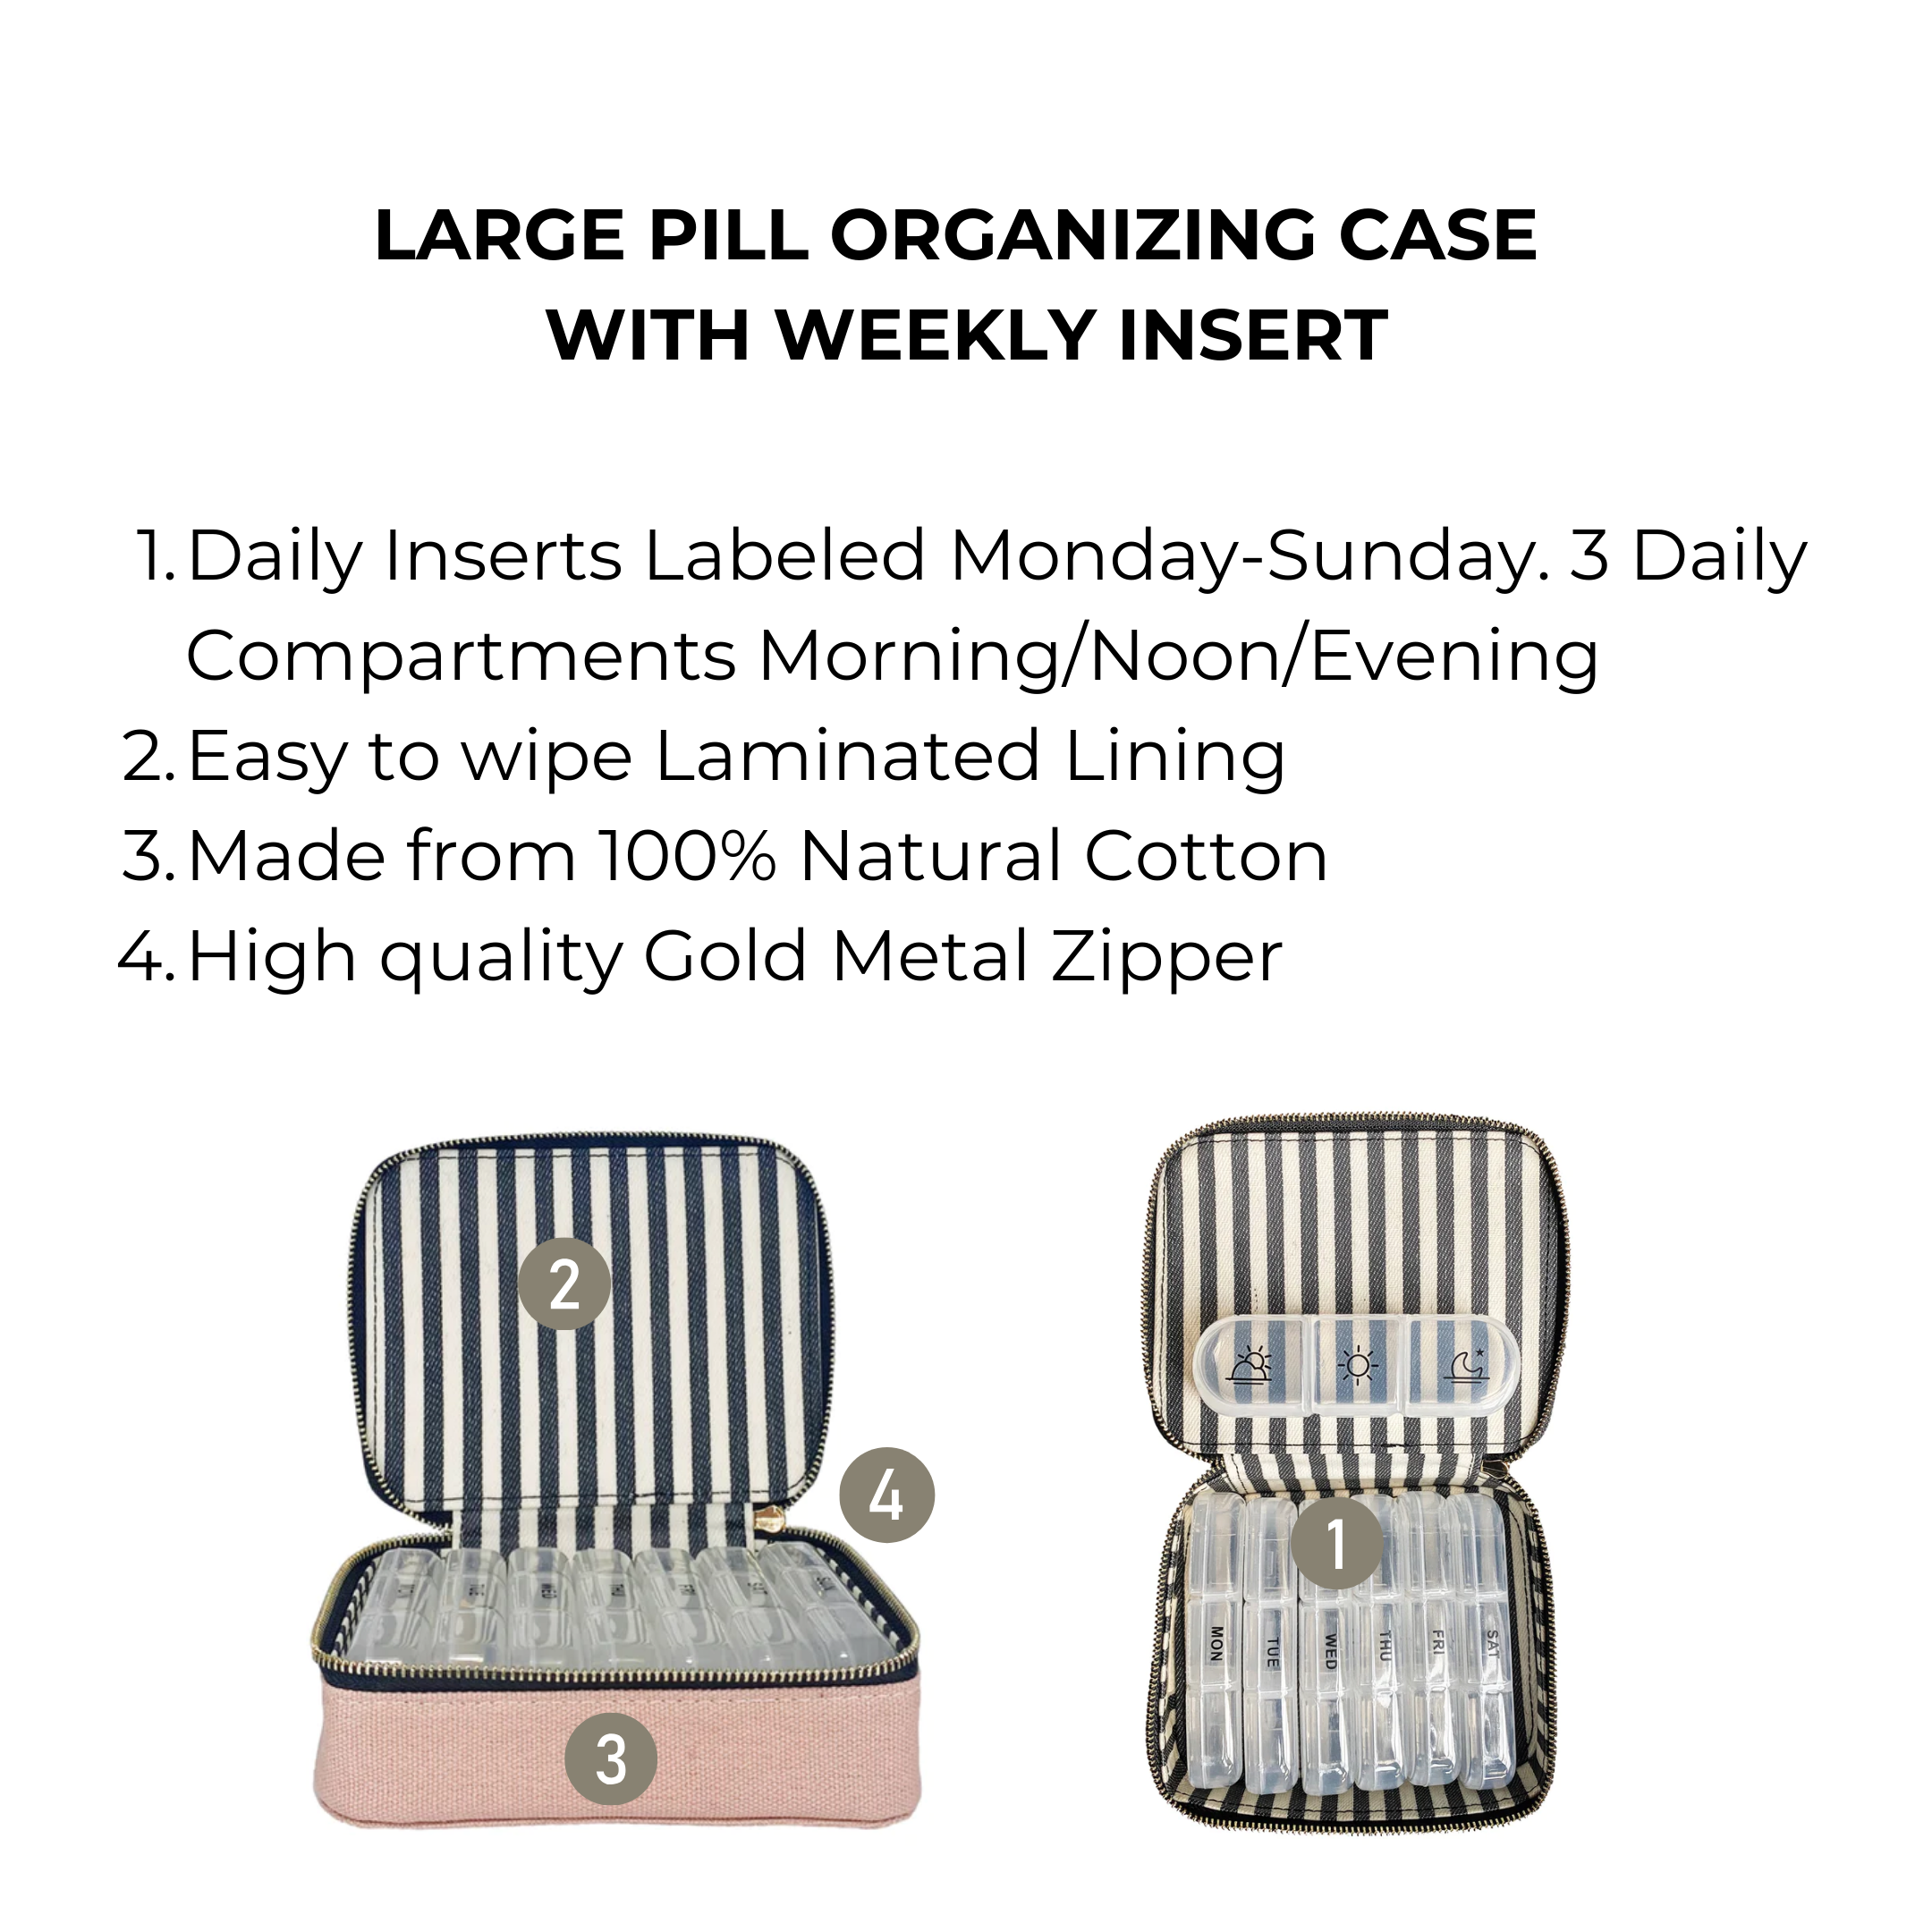 Large Pill Organizing Case with Weekly Insert, Pink/Blush | Bag-all